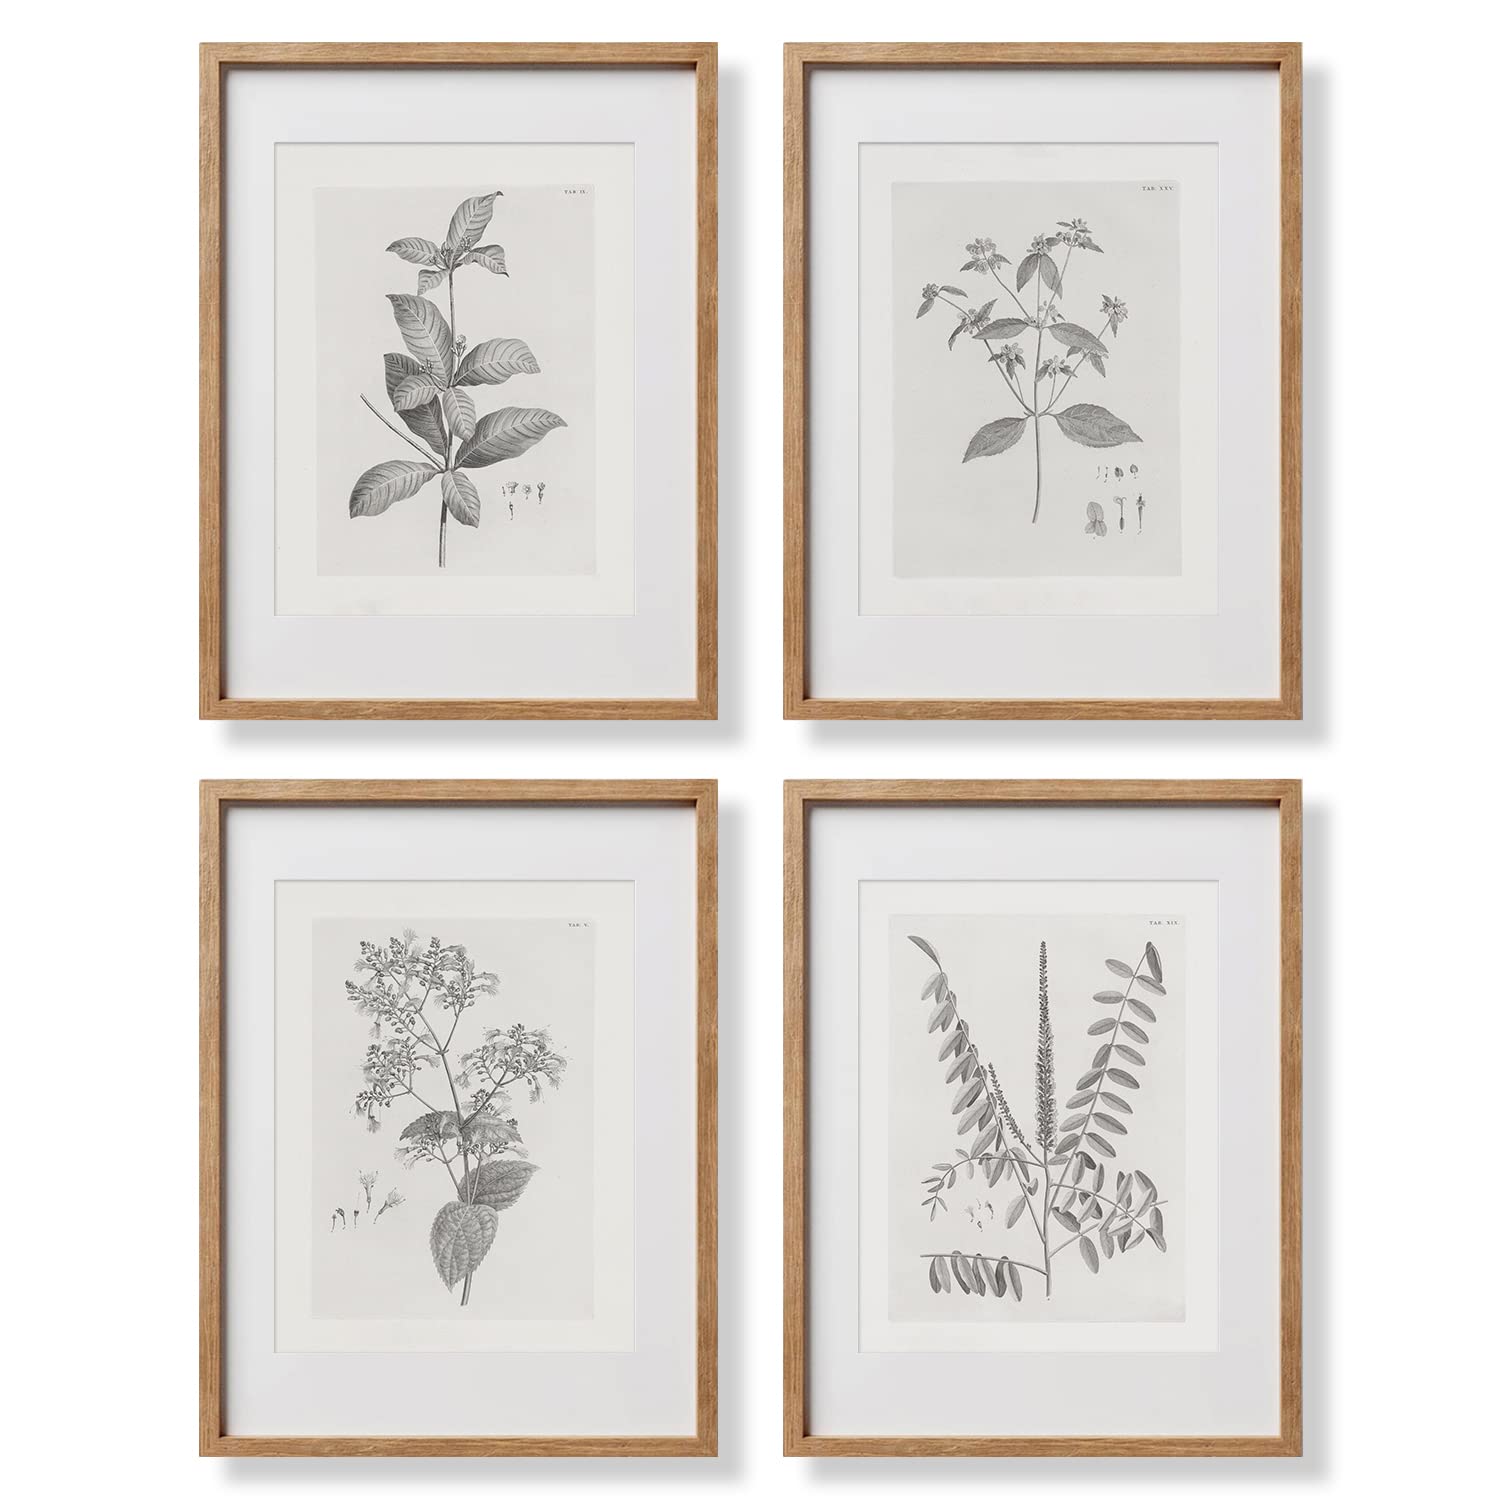 Farmhouse Wall Art Botanical Prints - Vintage Flower Boho Minimalist Floral Poster Decor for Bedroom Living Kitchen Bathroom Home Office - Black and White Plant Leave Wall Art - Set of 4 Picture 8x10